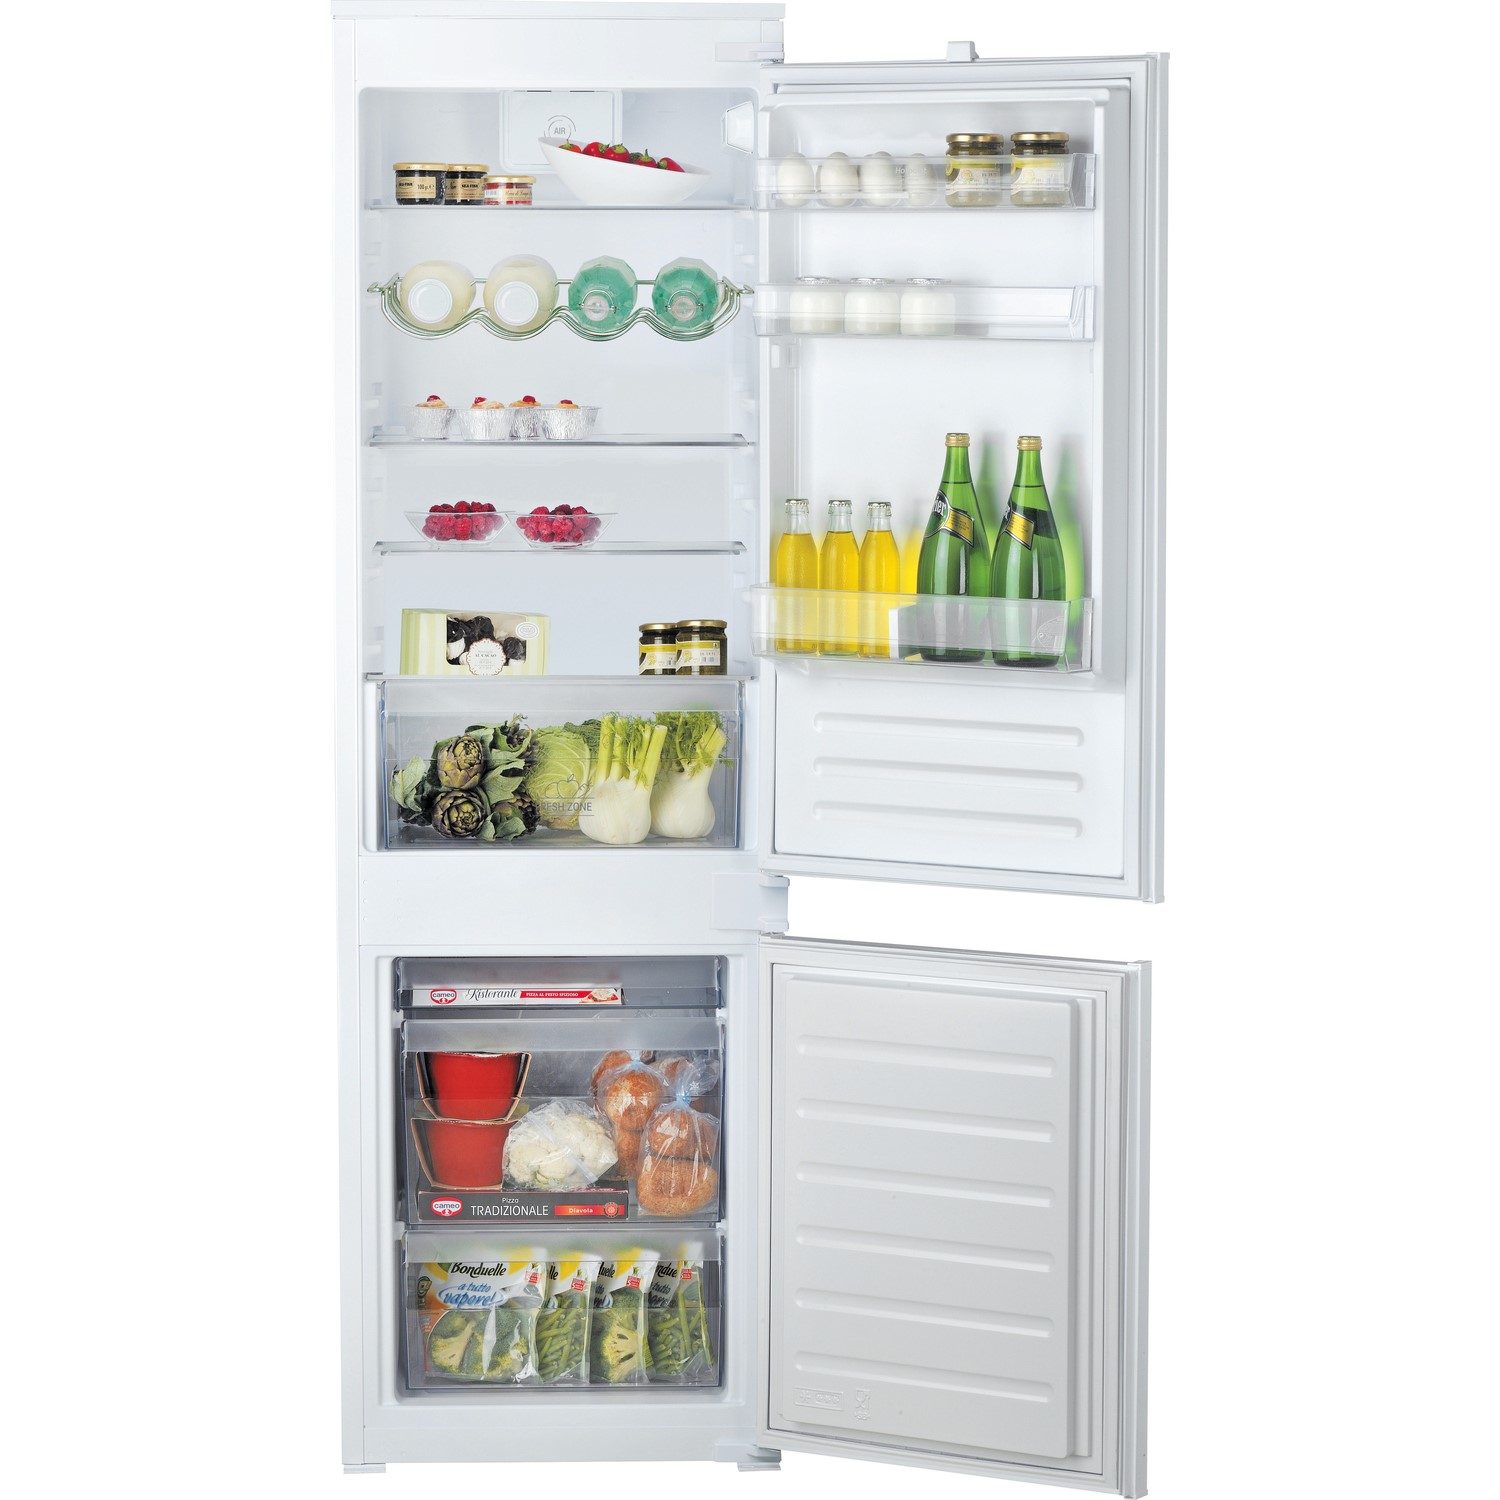 Photos - Other for Computer Hotpoint-Ariston HOTPOINT 273 Litre 70/30 Integrated Fridge Freezer 859991670410 